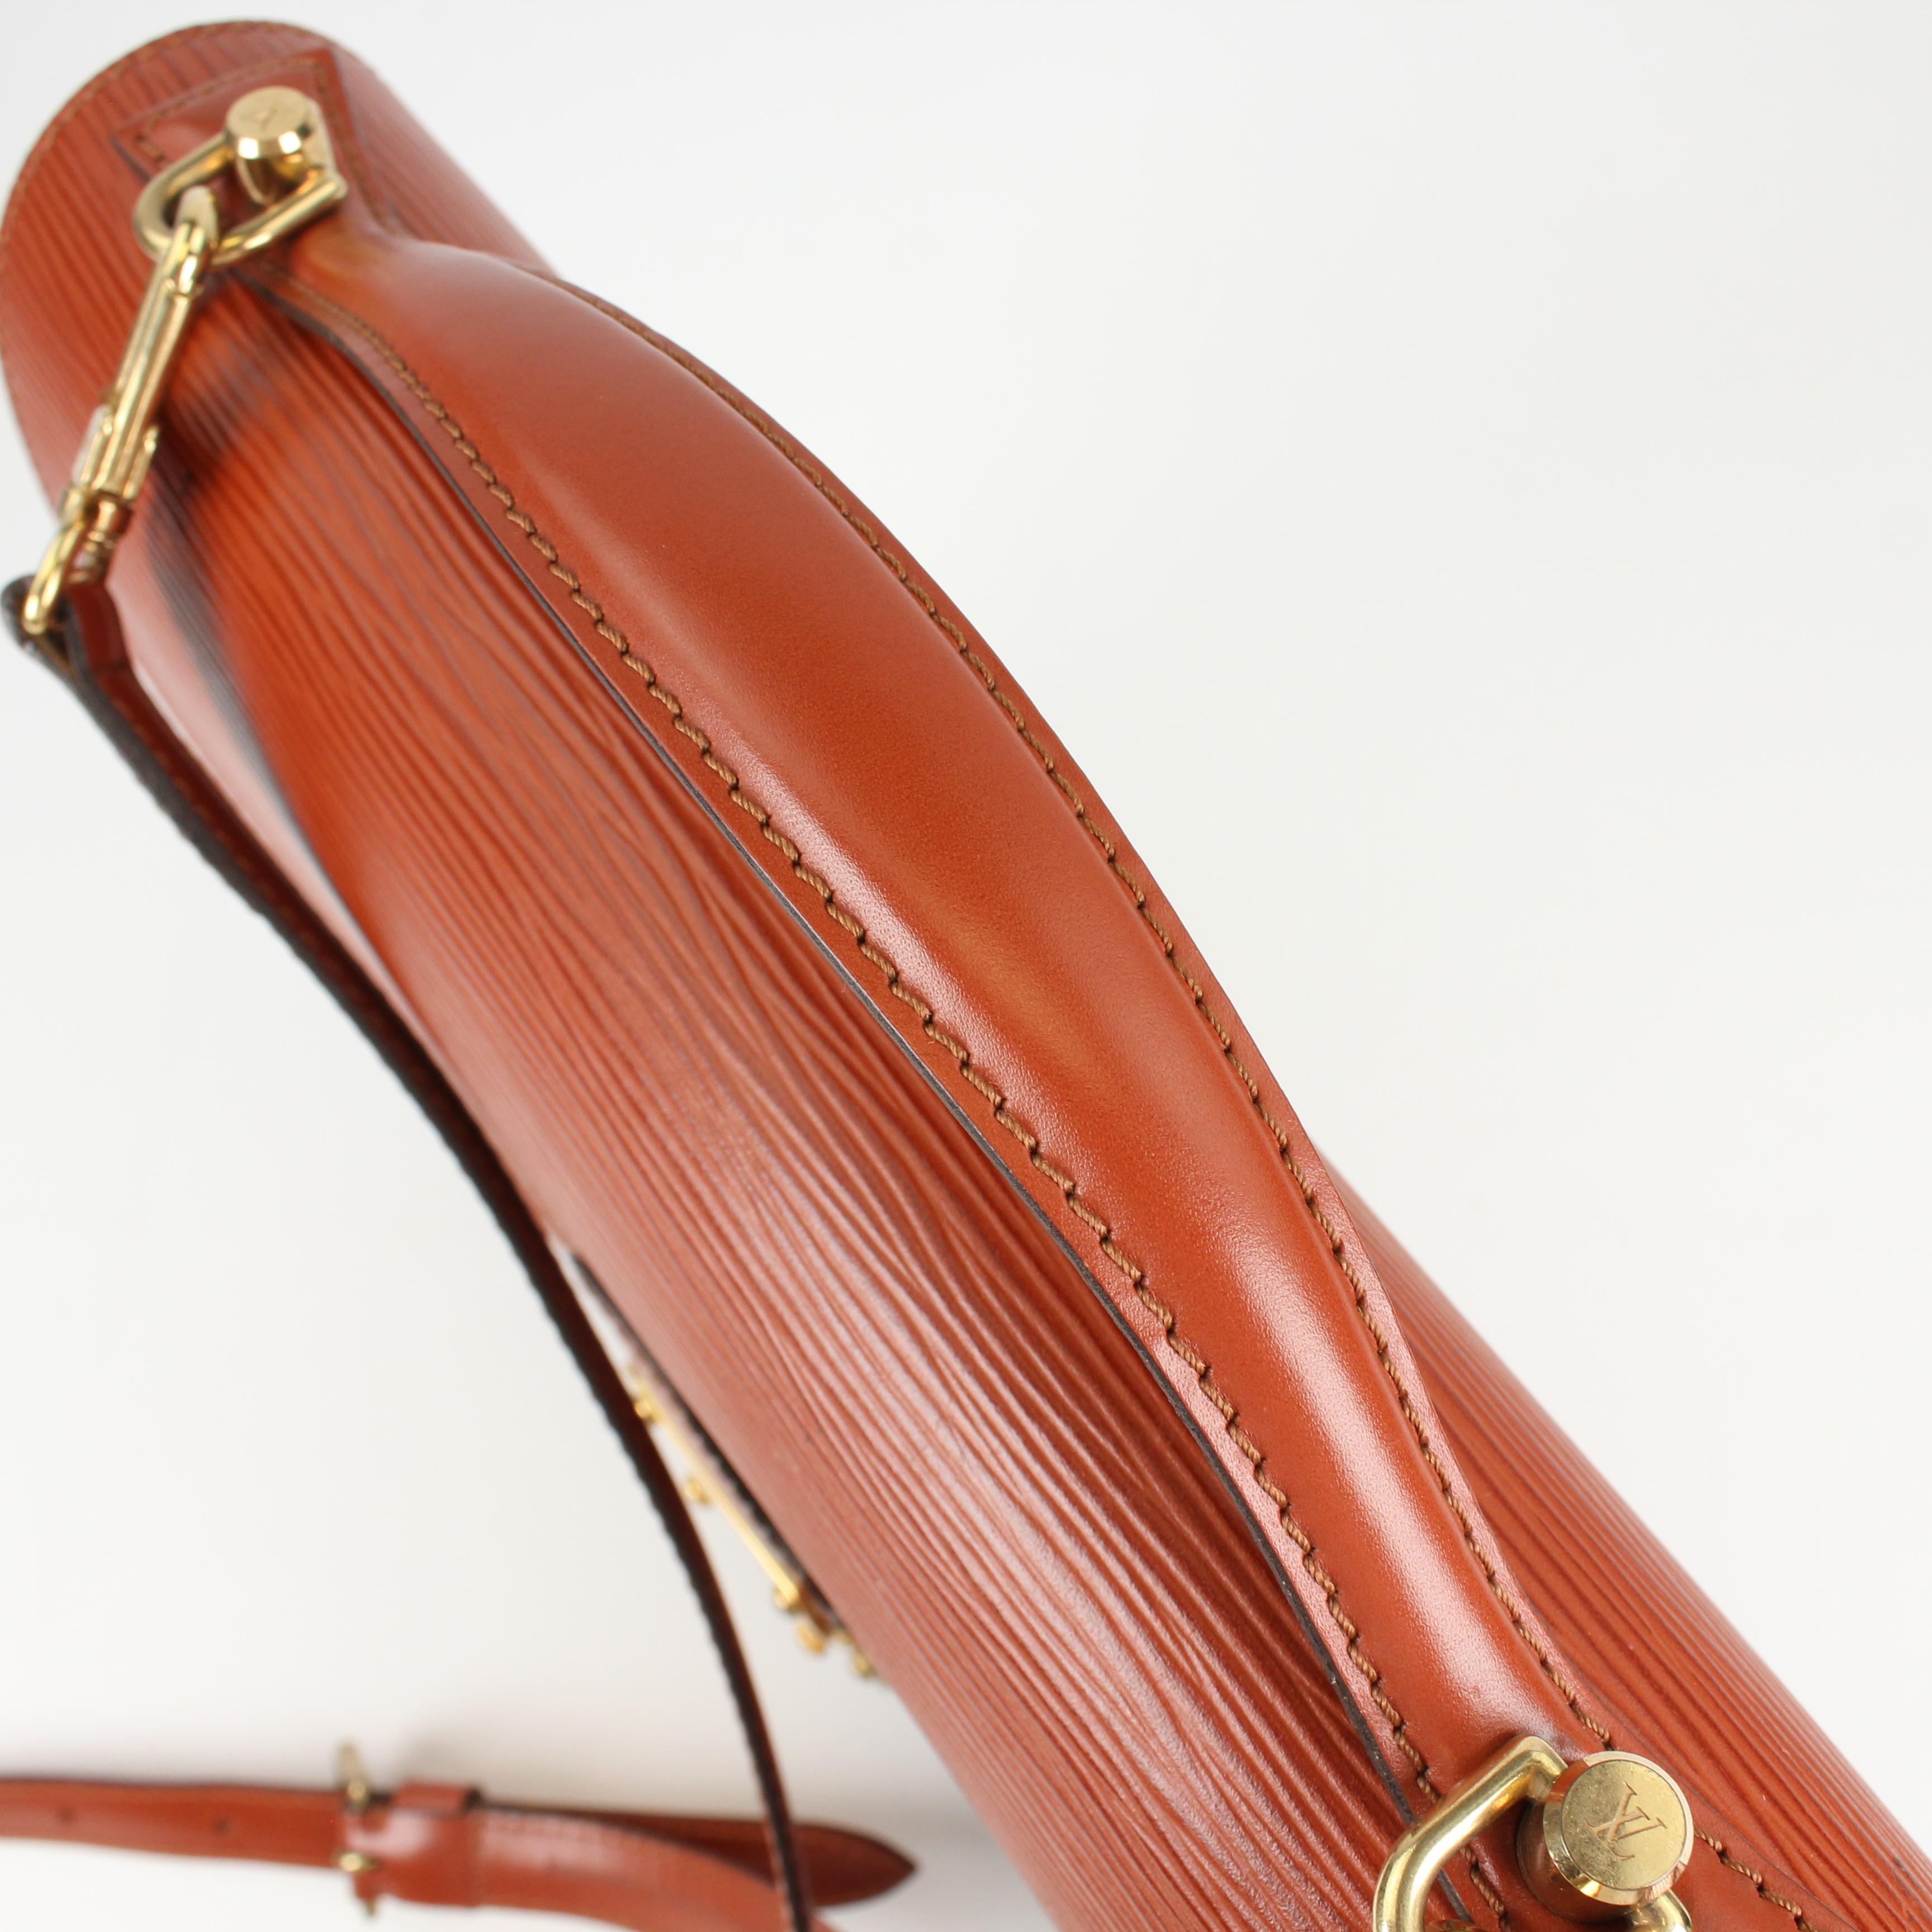 Louis Vuitton Monceau Crossbody Bag in Leather In Good Condition For Sale In Rīga, LV